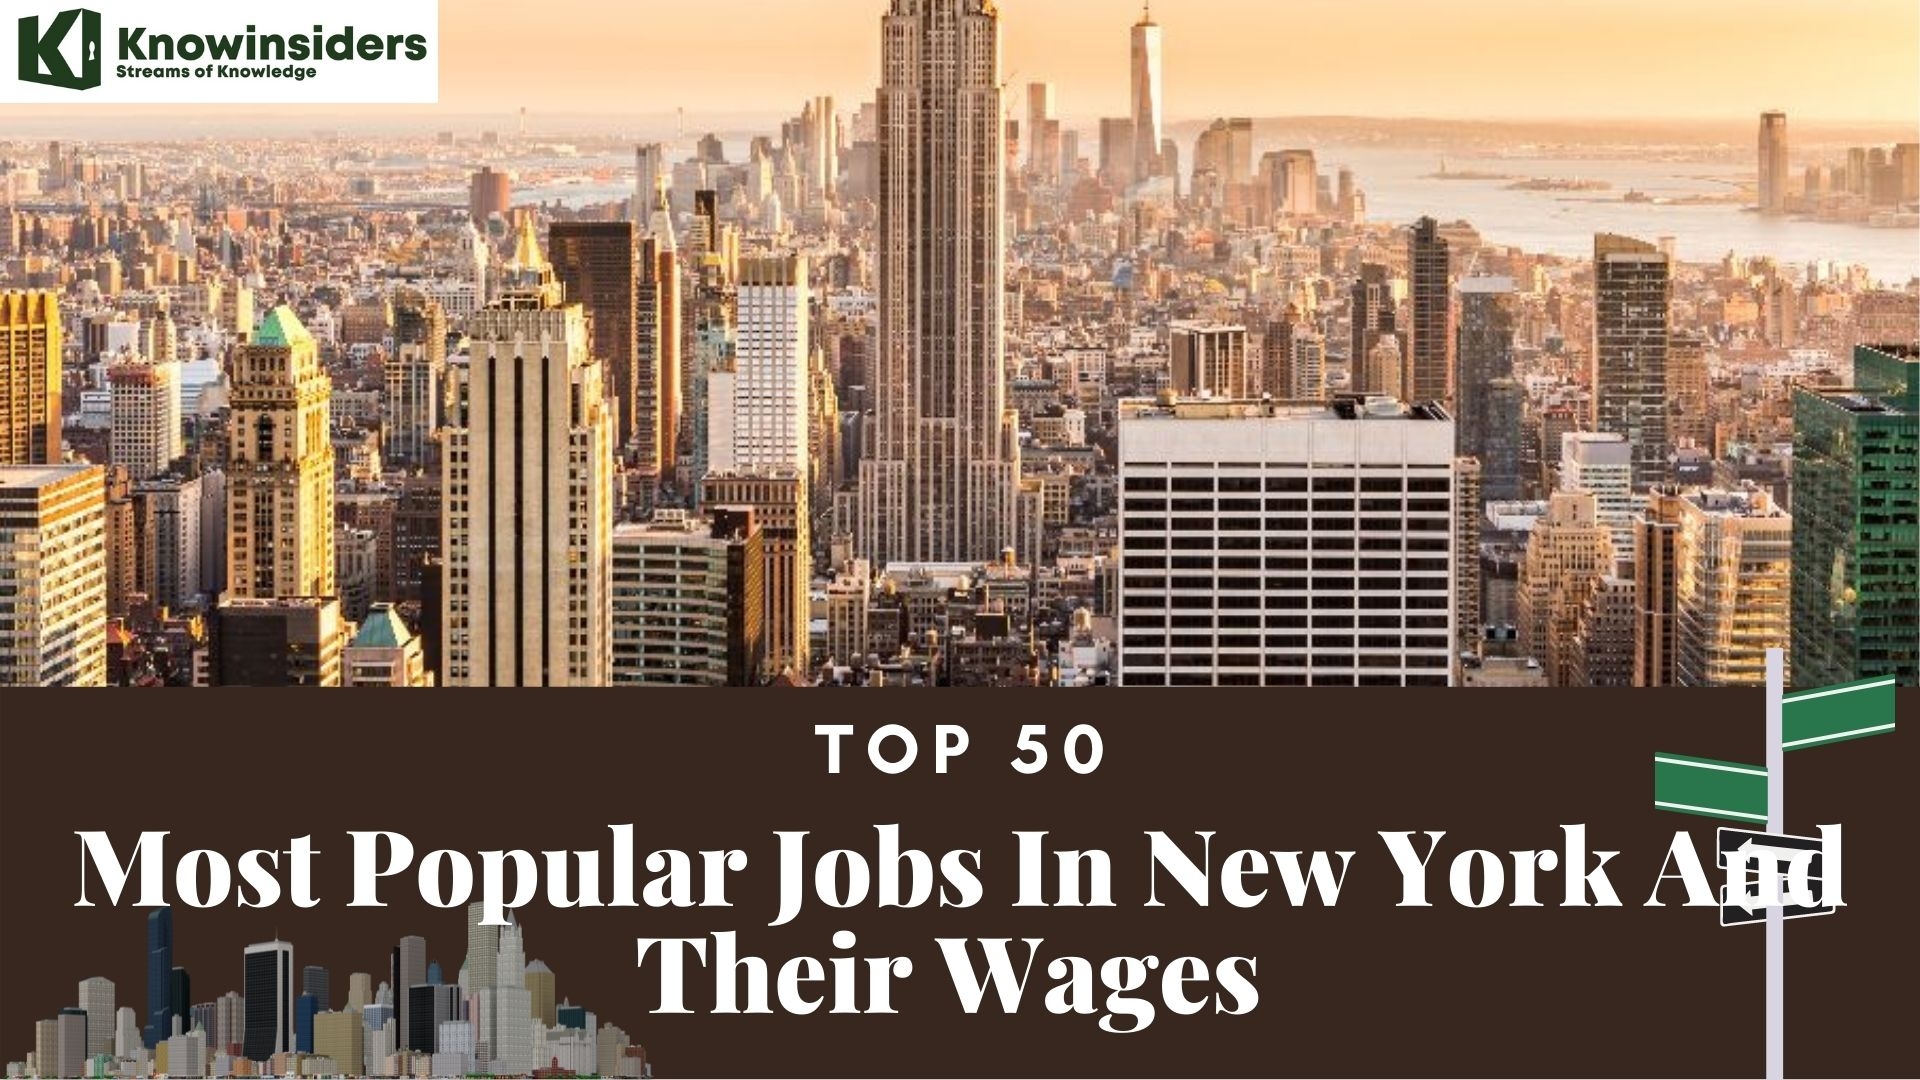 Top 50 Most Popular Jobs And Their Wages in New York - How To Get A Job